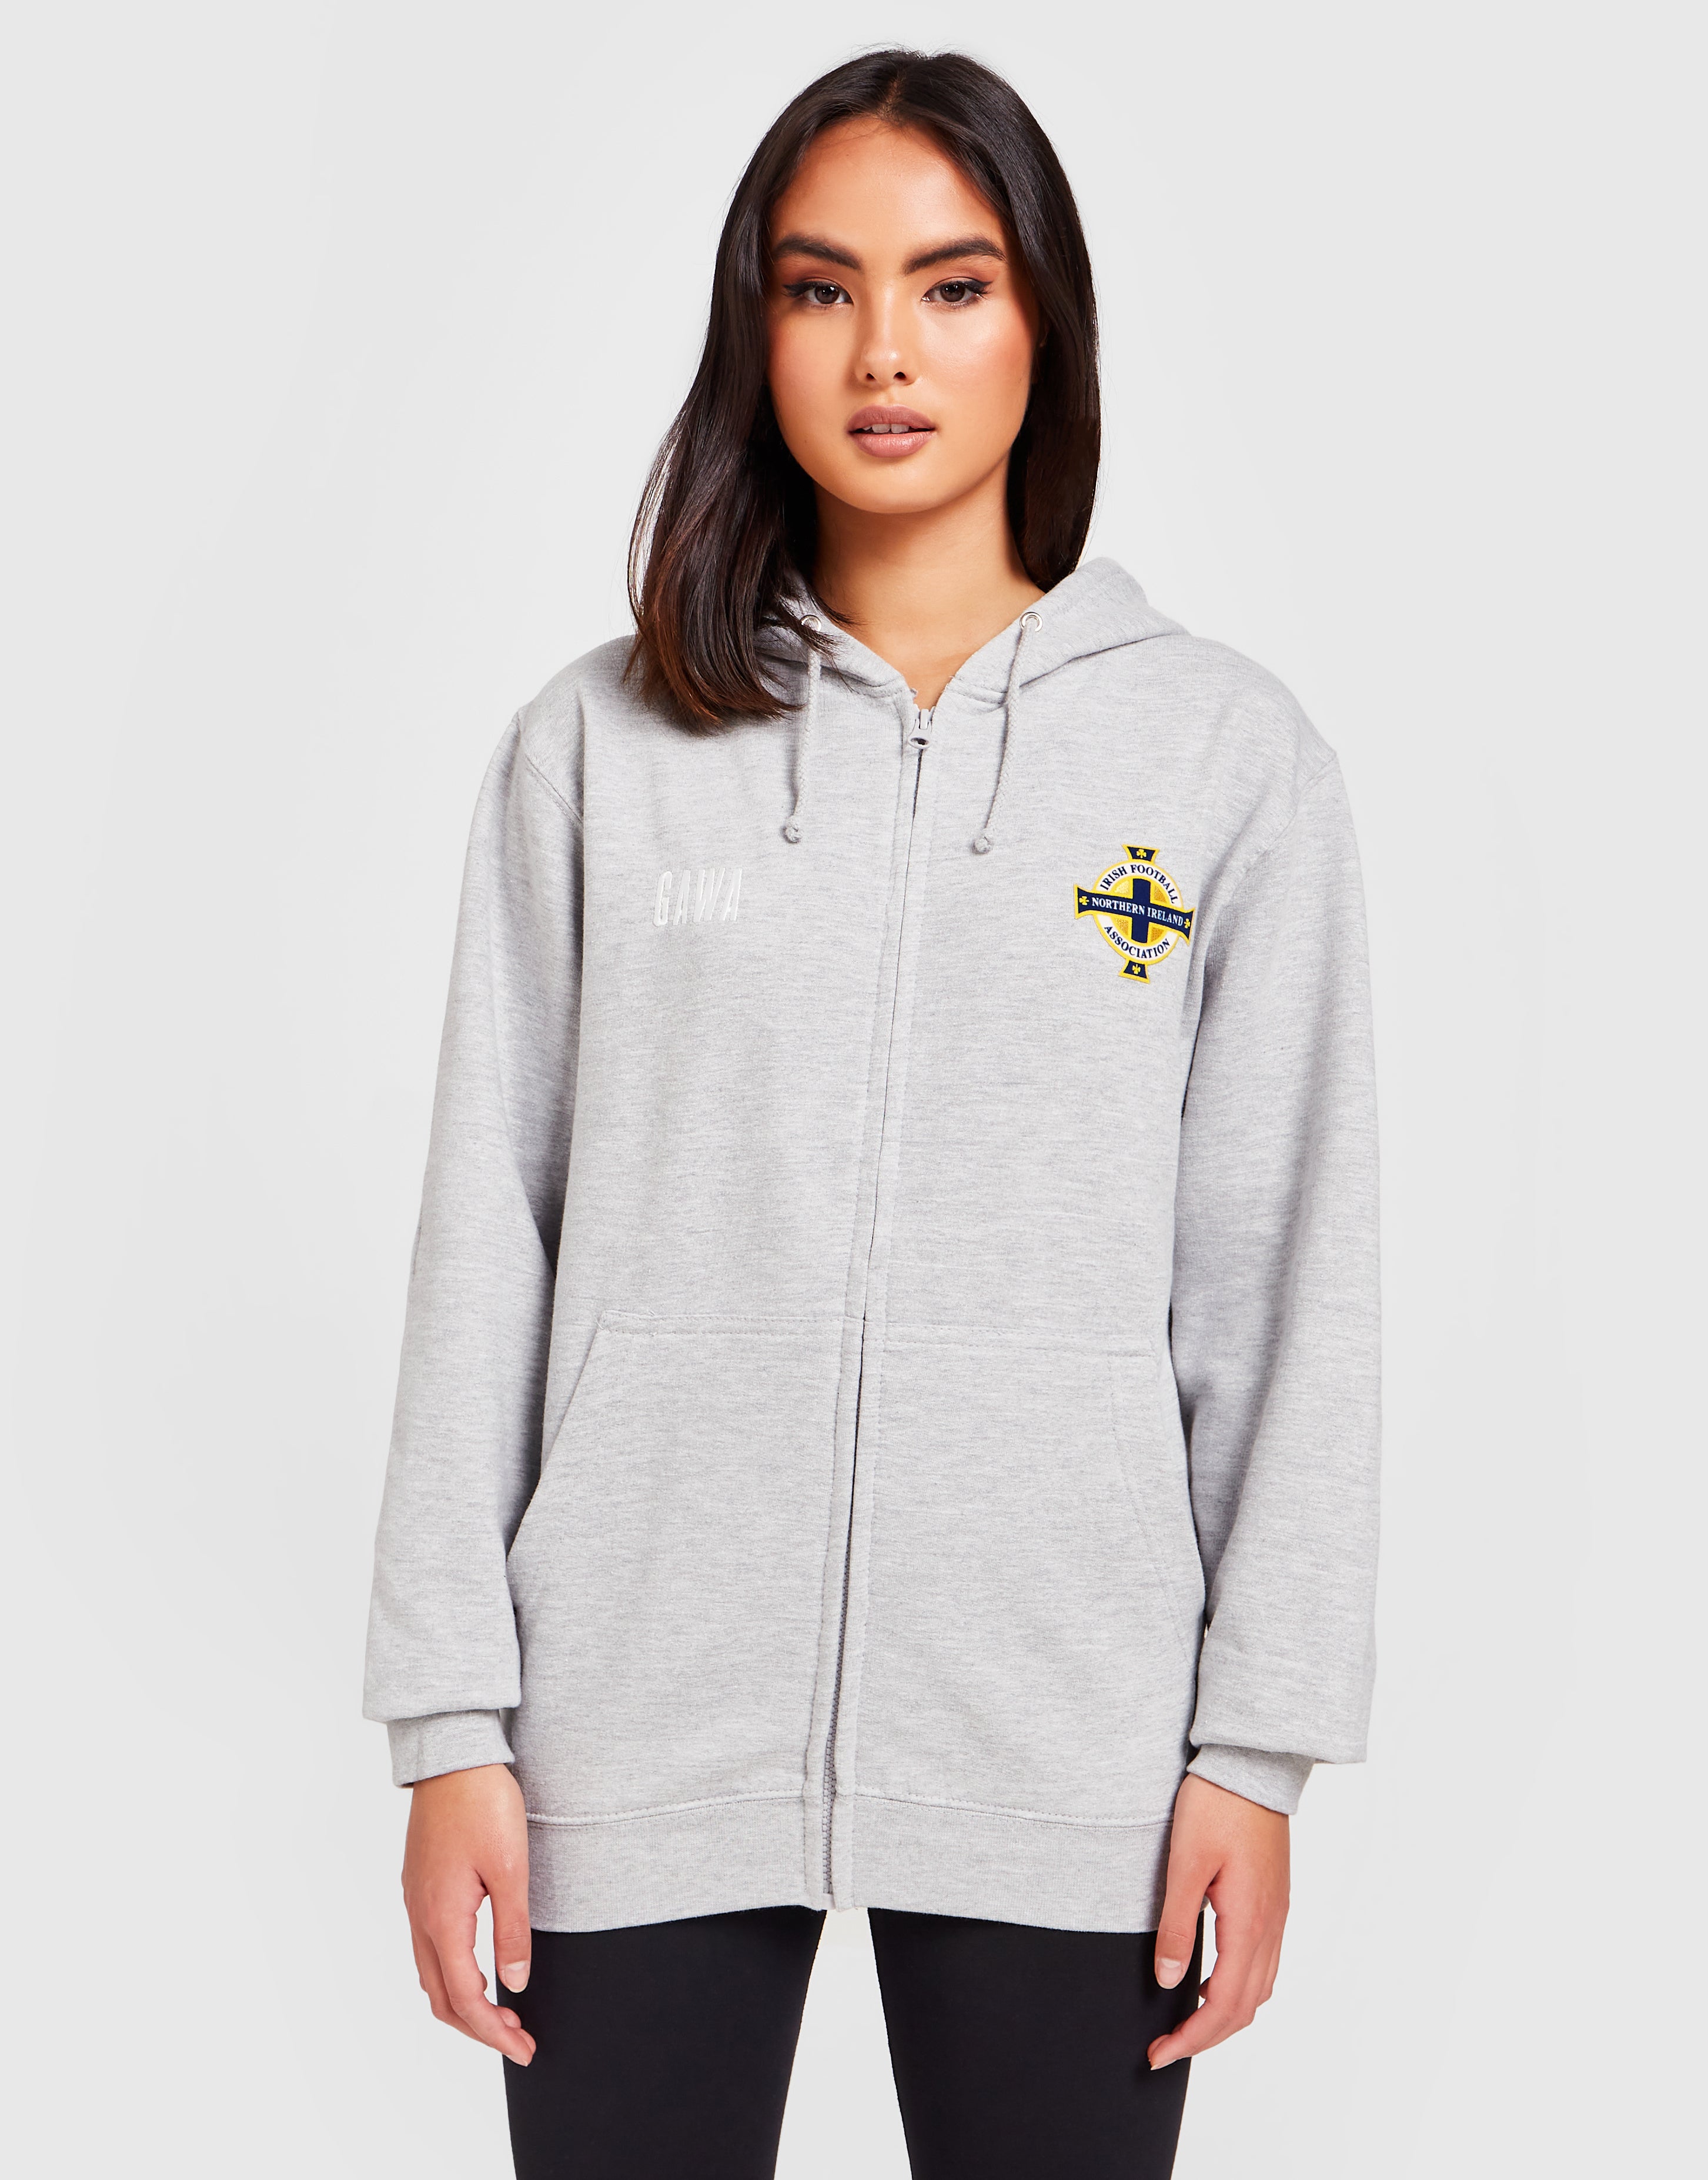 Official Northern Ireland Crest Zip Hoodie Womens - Grey Marl - The World Football Store